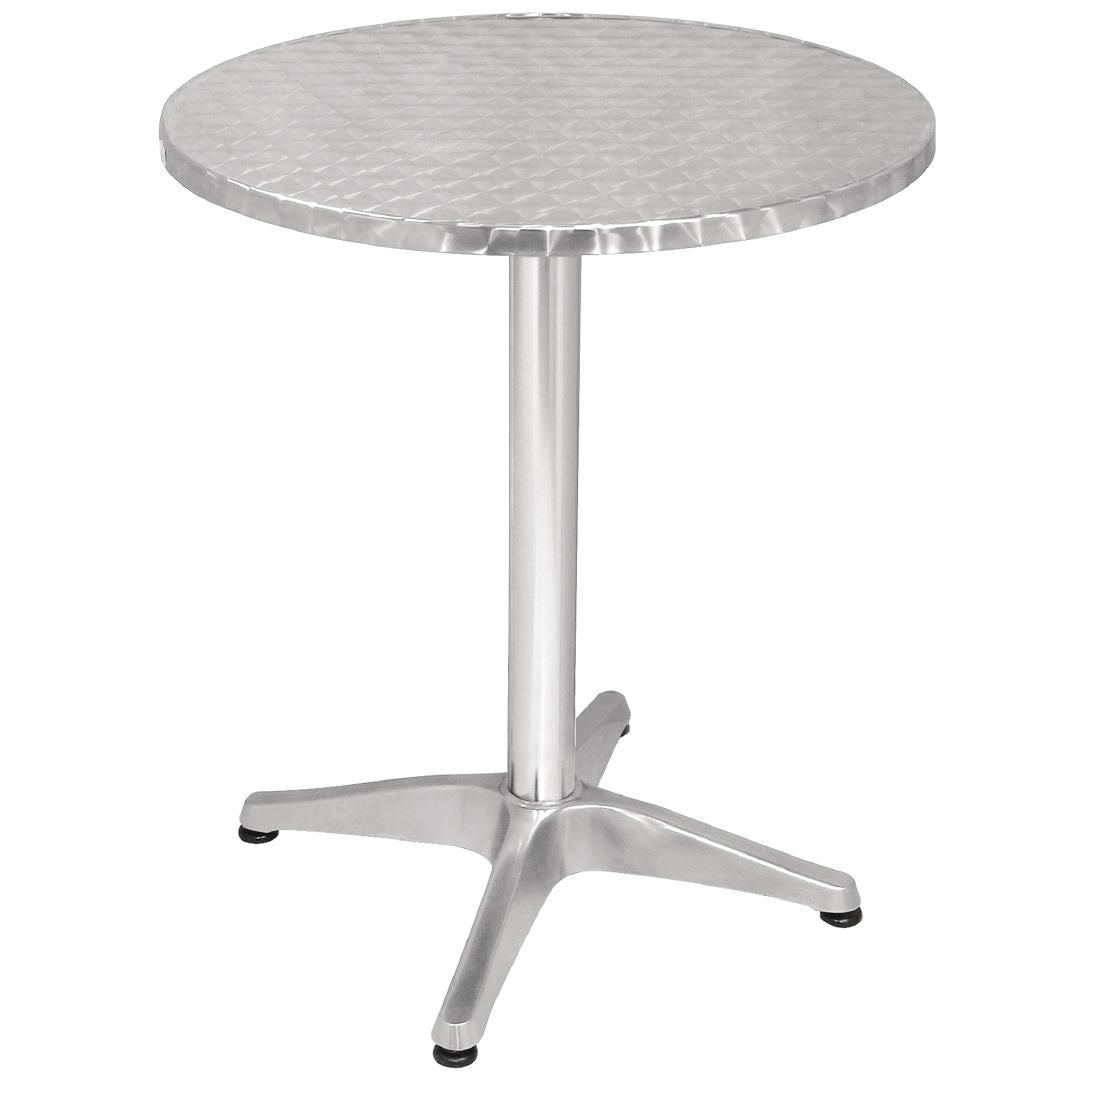 Bolero Round Bistro Table Stainless Steel JD Catering Equipment Solutions Ltd